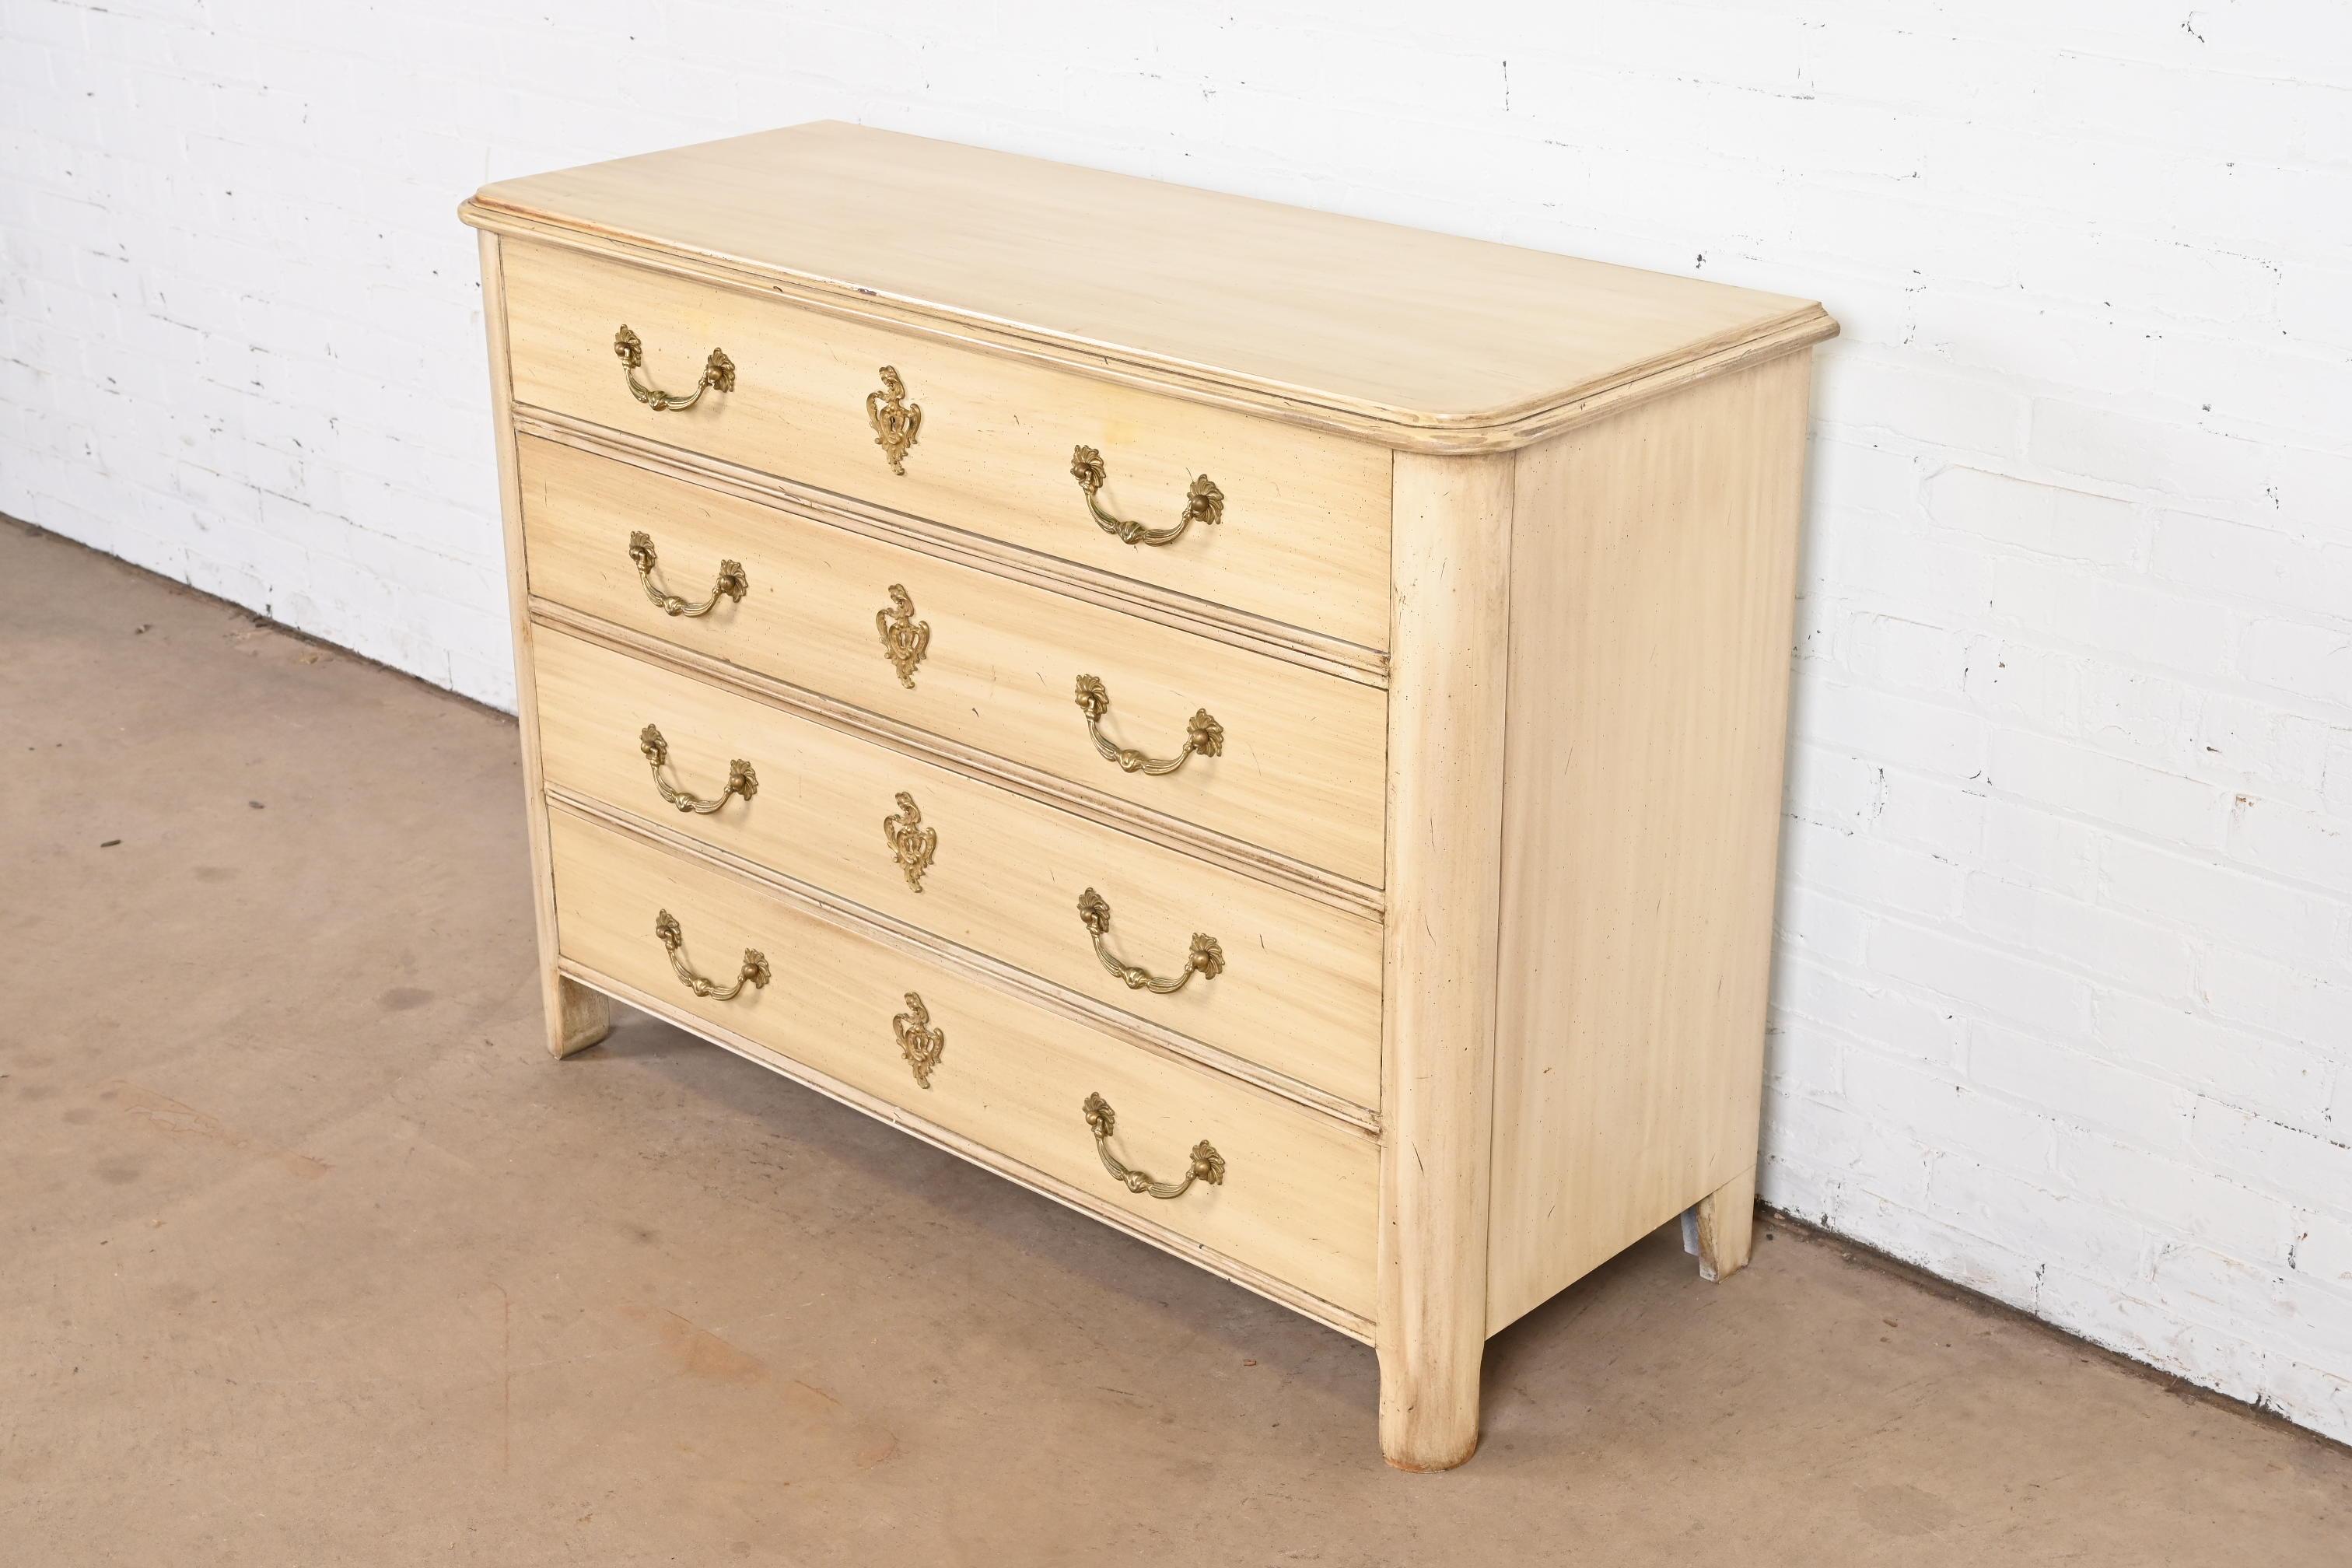 Louis XV Baker Furniture French Provincial Cream Painted Chest of Drawers, Circa 1960s For Sale